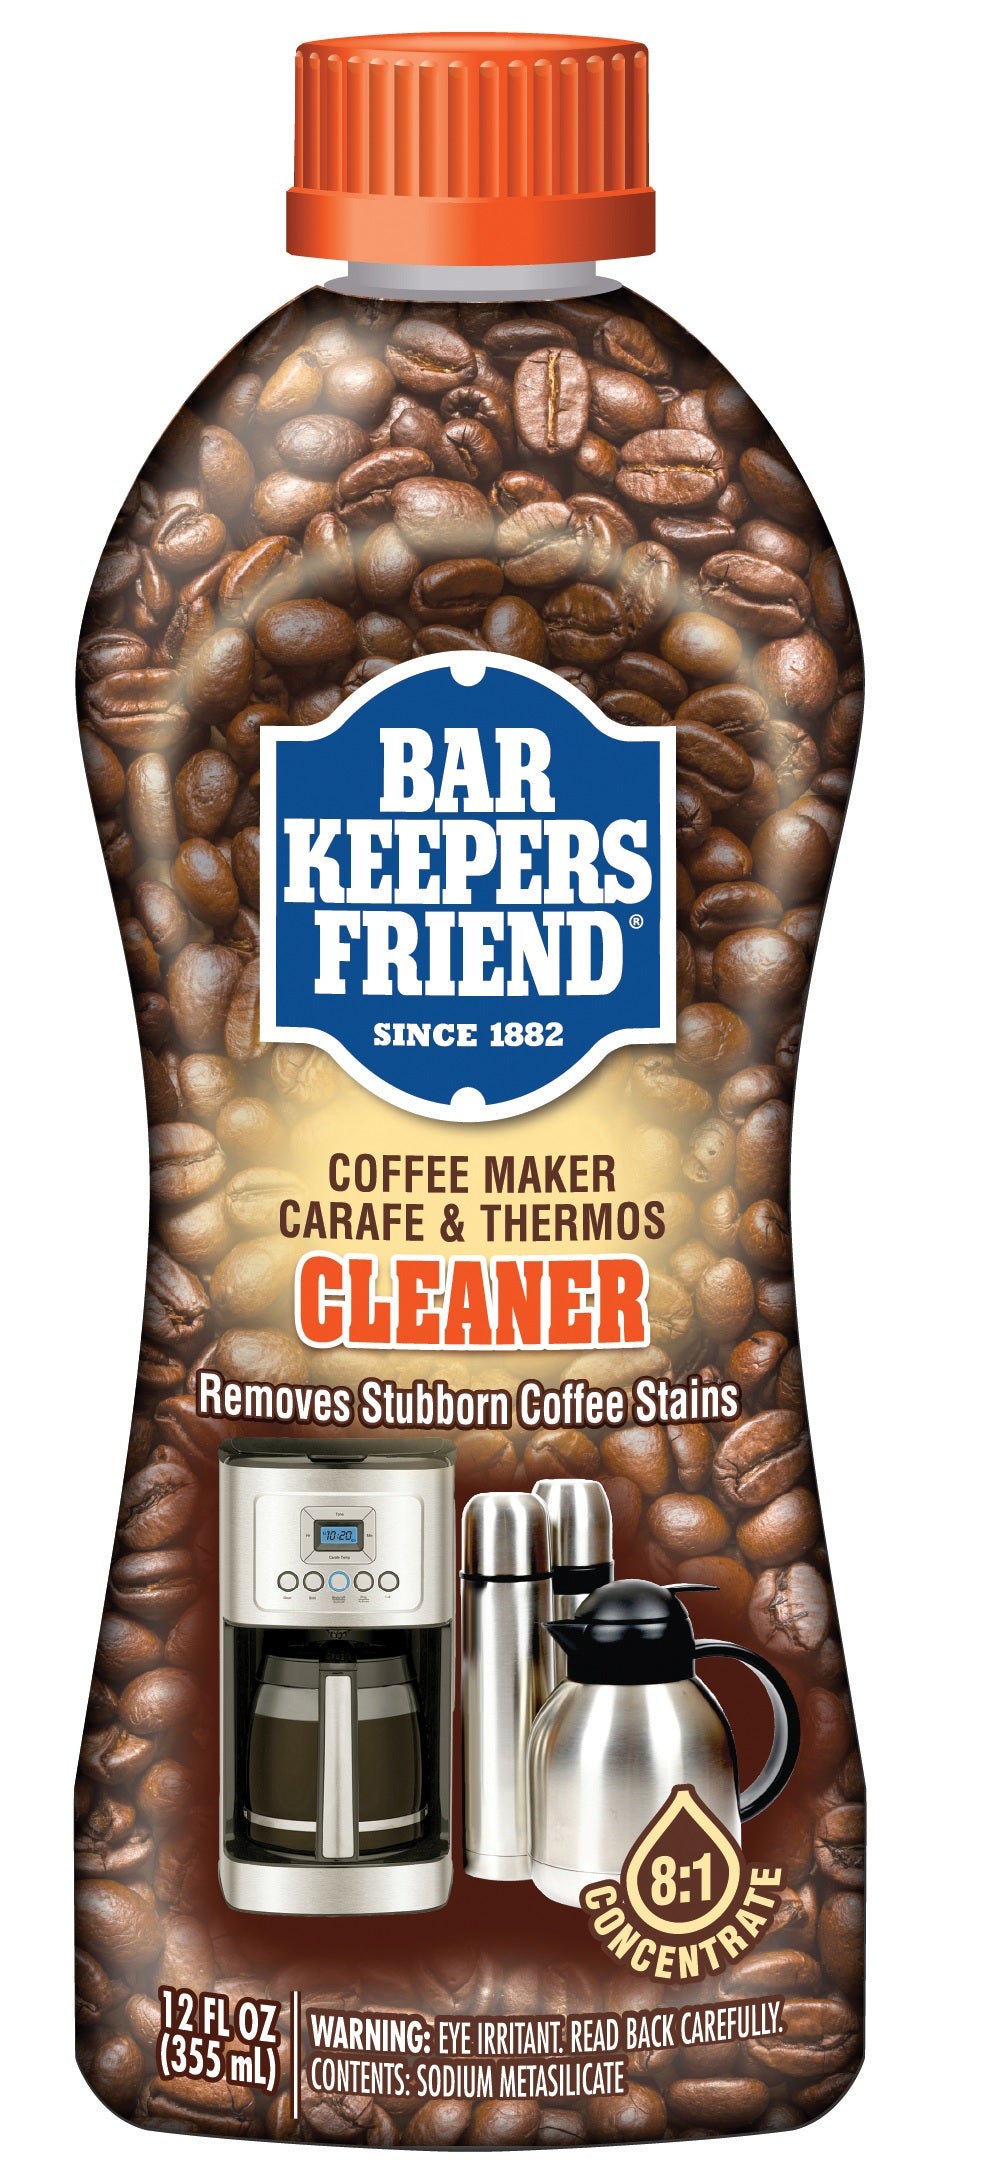 Bar Keepers Friend 11815 Coffee Maker Carafe Cleaner, 12 Oz